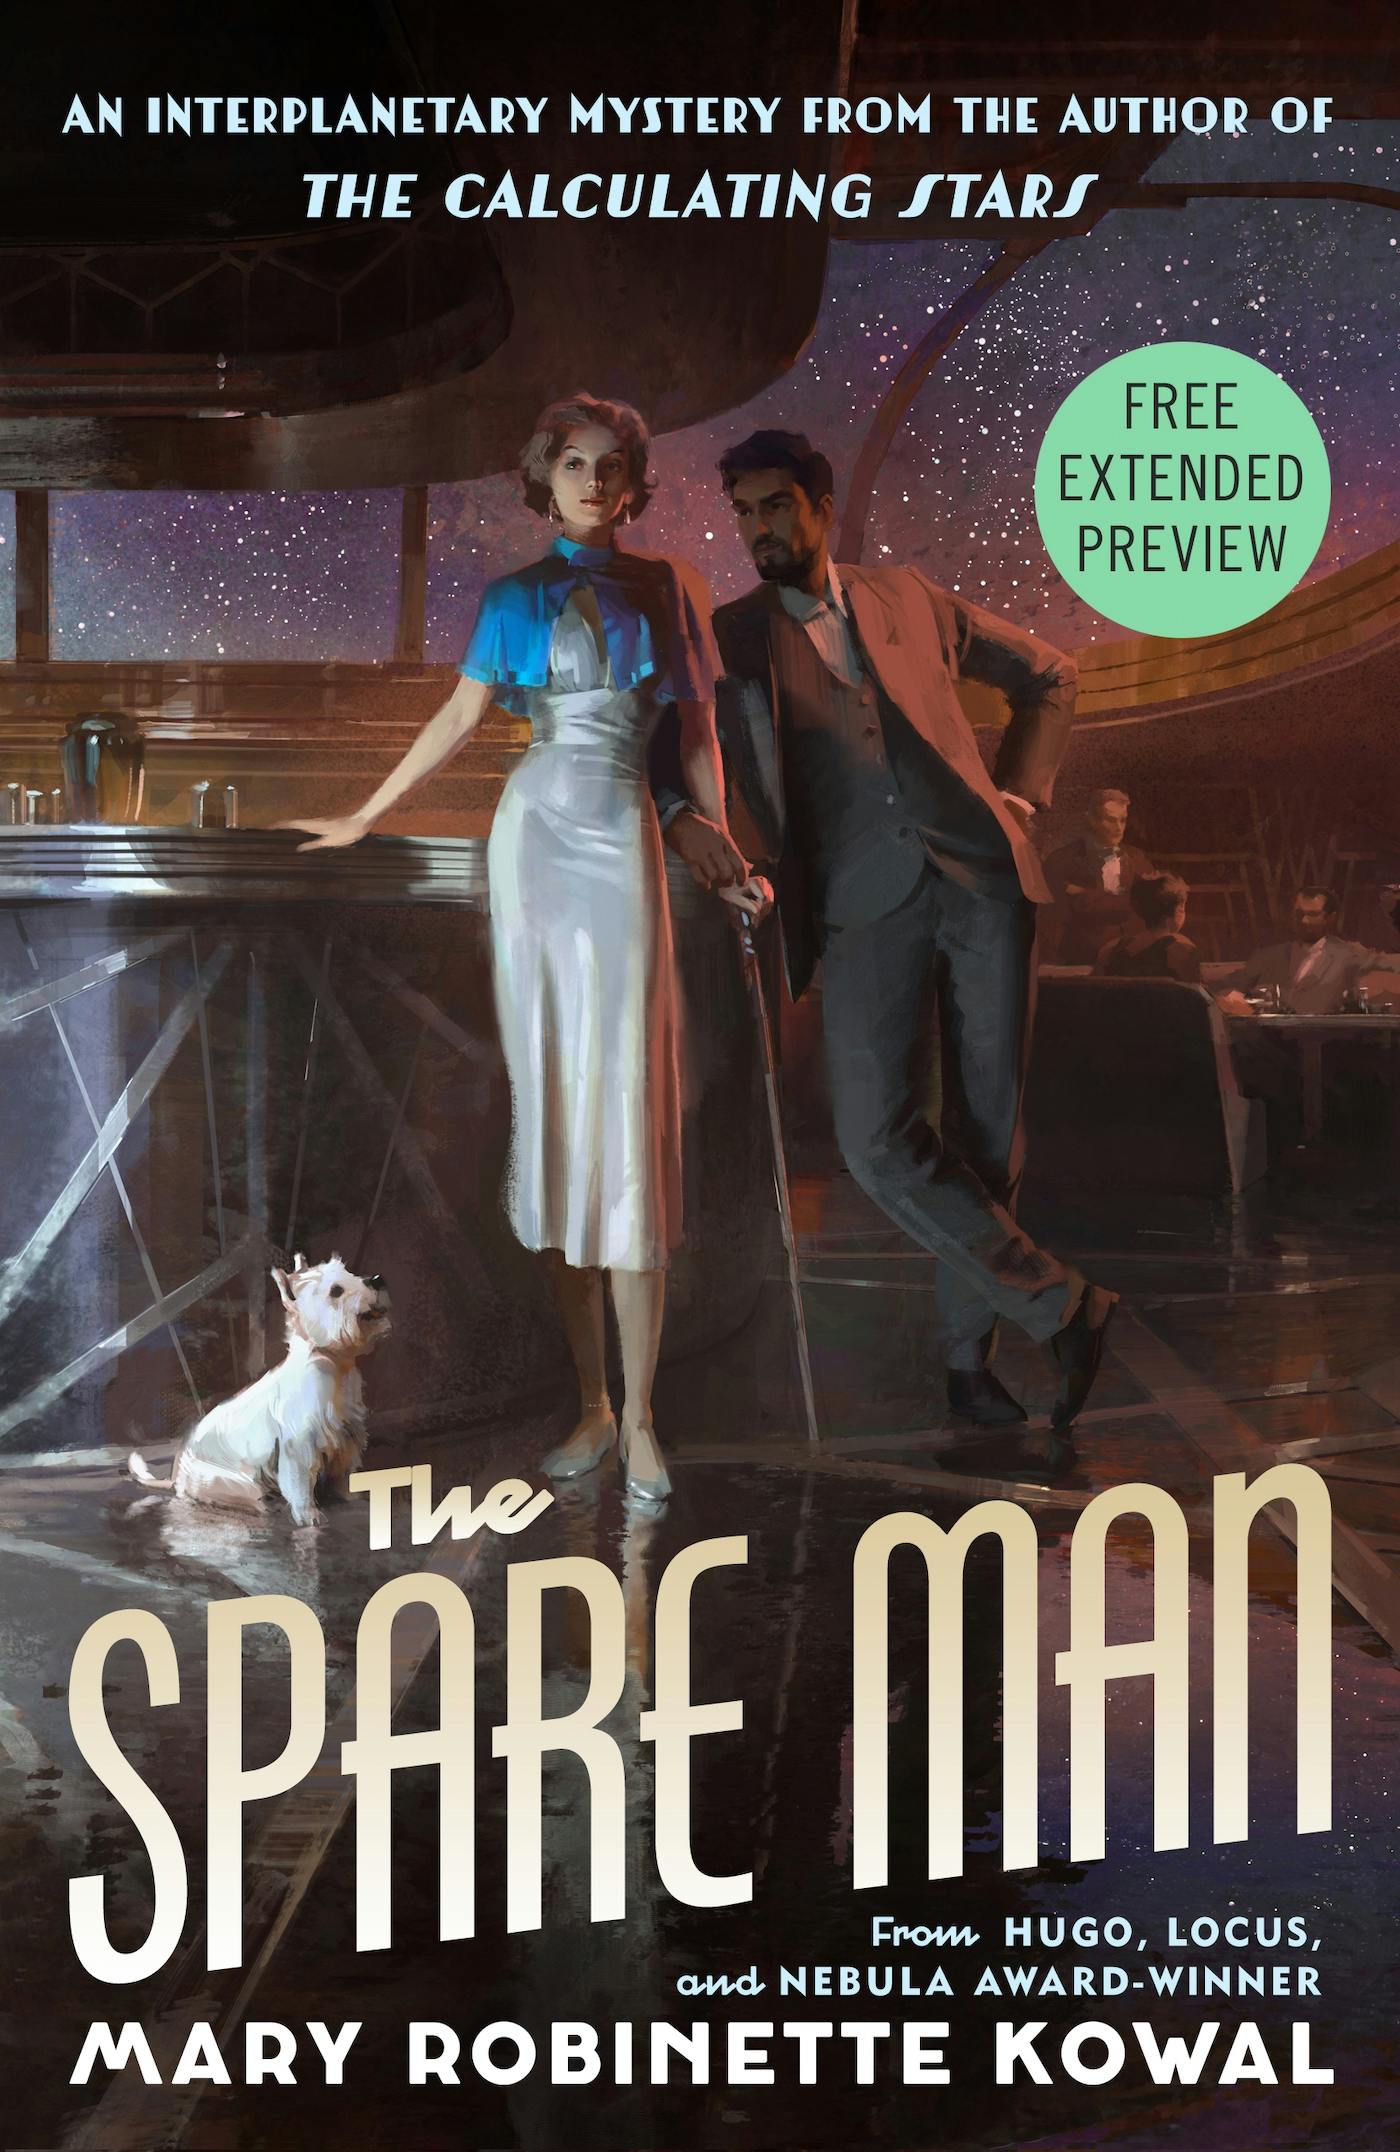 Cover for the book titled as: The Spare Man Sneak Peek